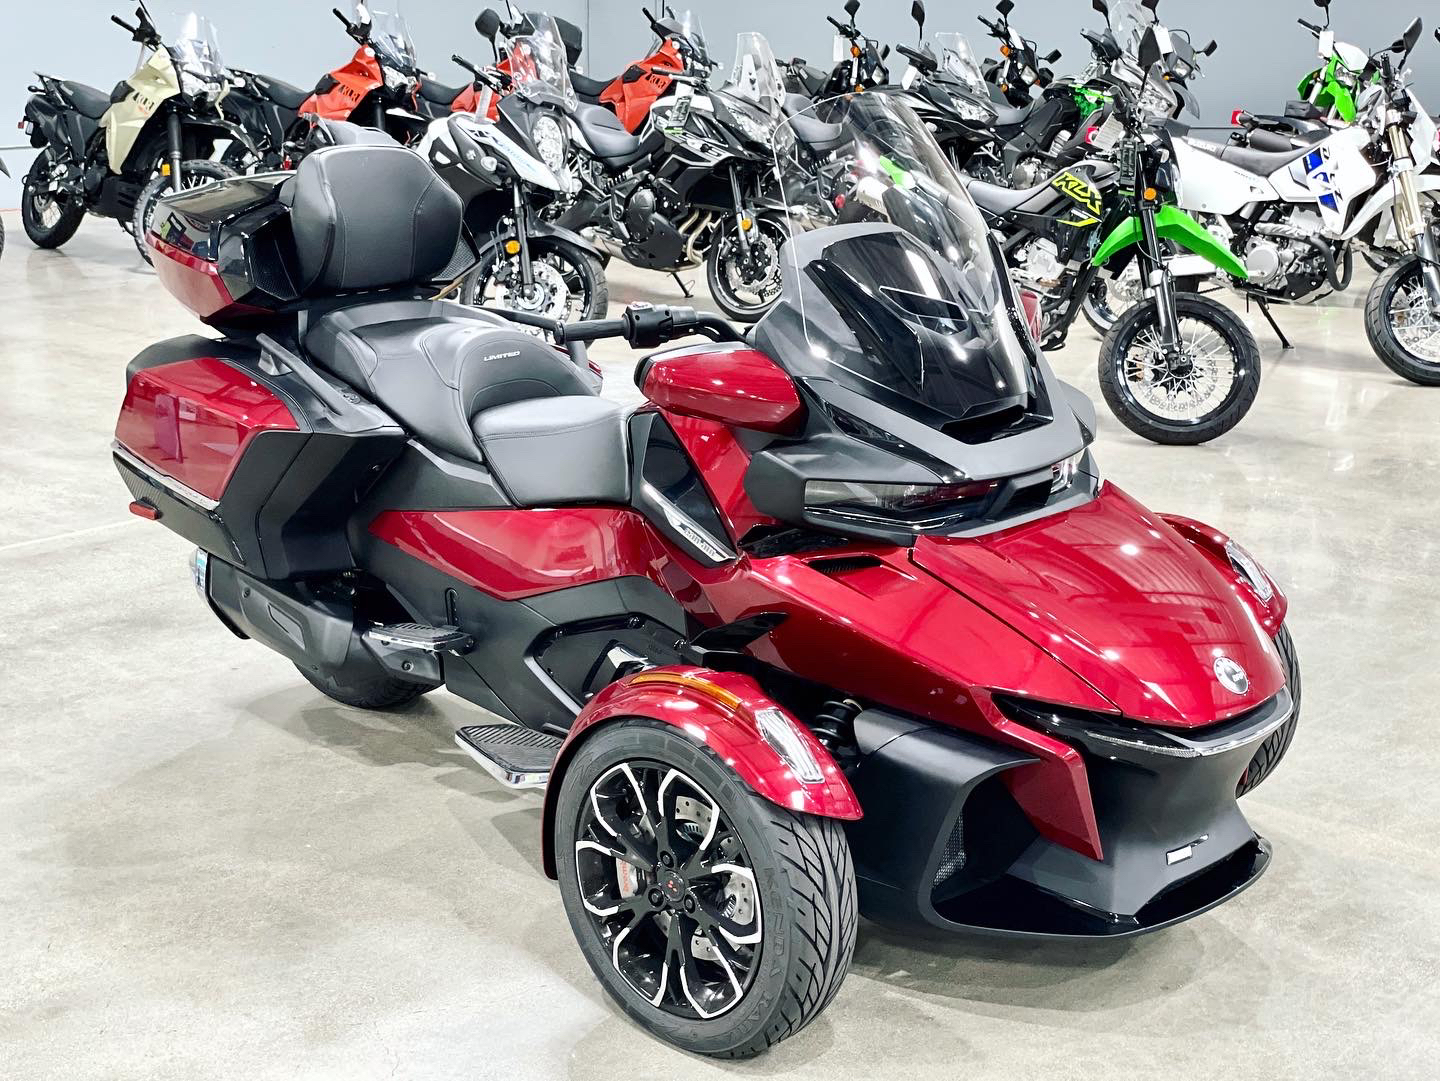 2022 Can-Am Spyder RT Limited in Corona, California - Photo 1